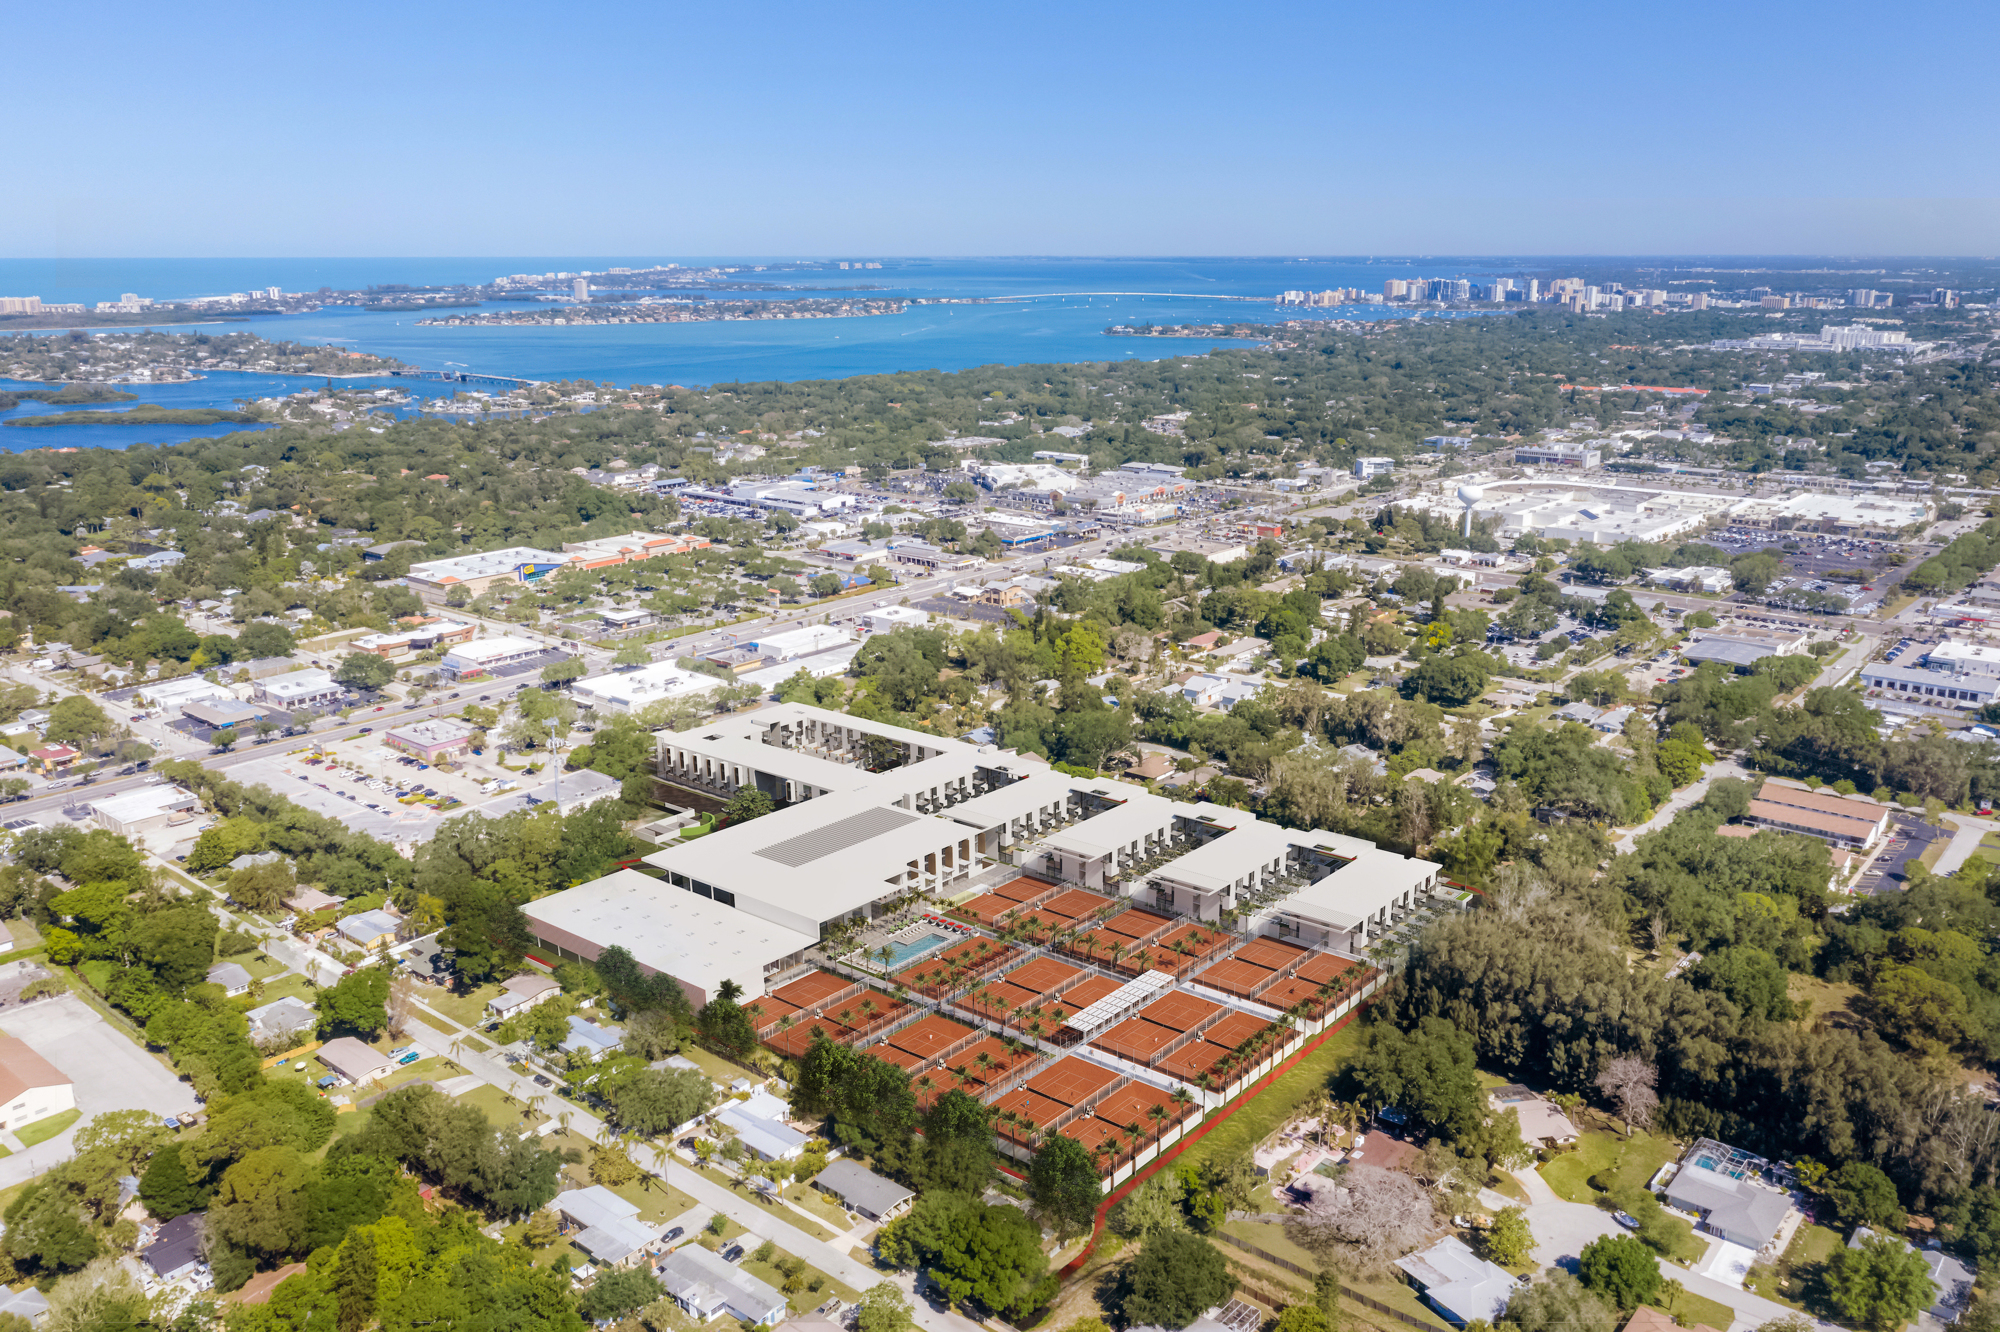 Courtesy/ Halflants + Pichette renderings. The planned redevelopment project for the Bath & Racquet Club in Sarasota includes 277 residential units and 45,000 square feet of commercial/retail space.